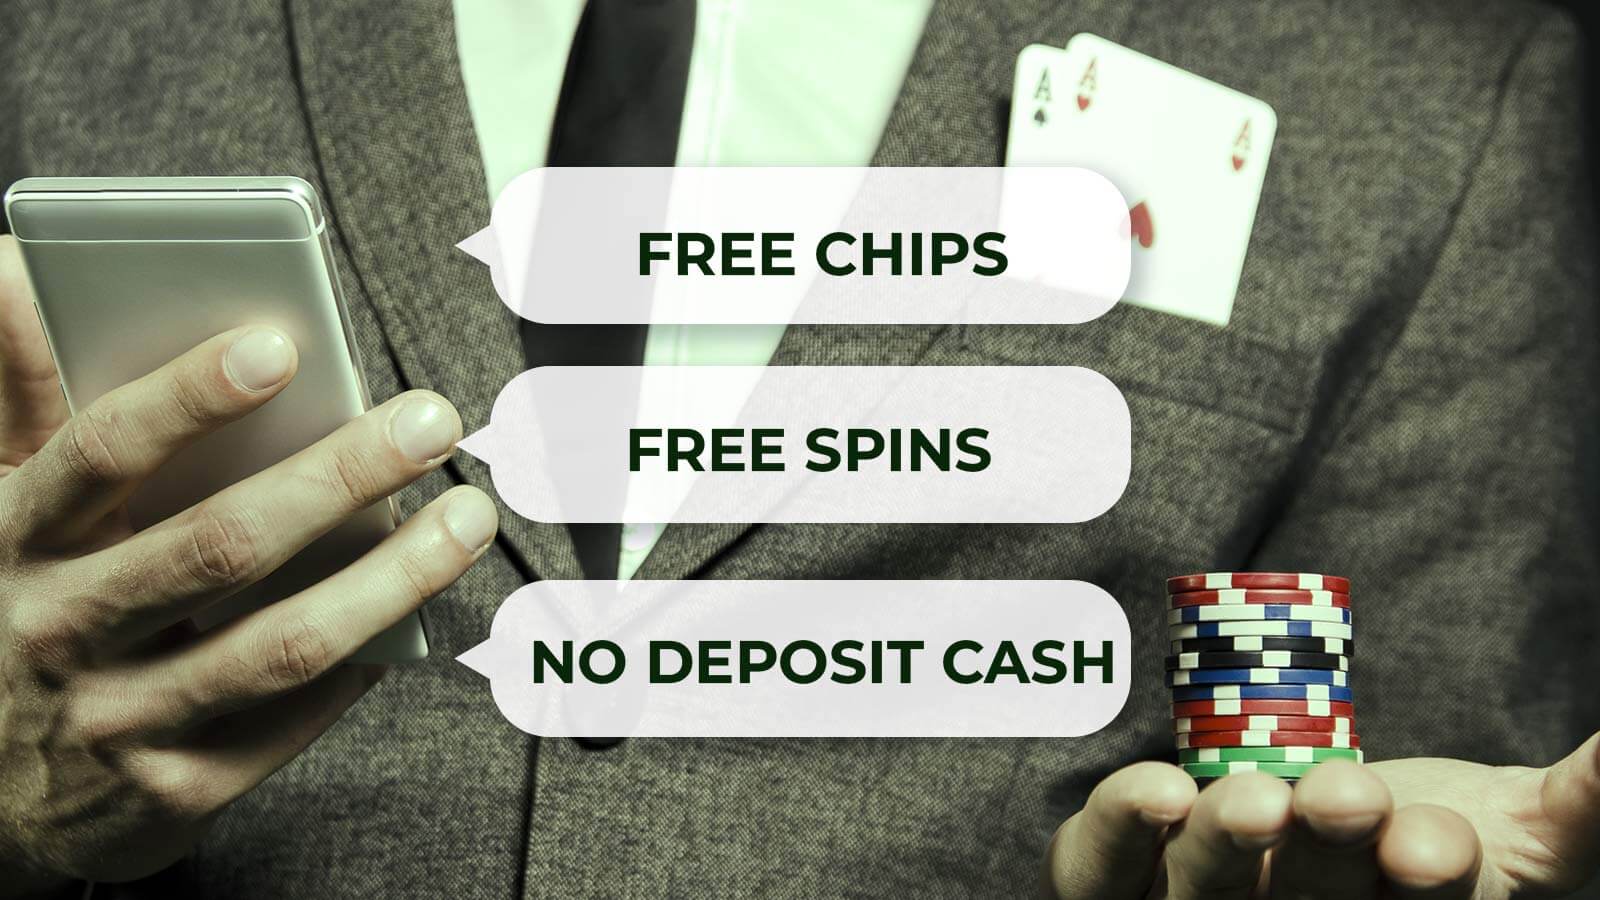 How to Claim Free Chips, Spins and No Deposit Cash